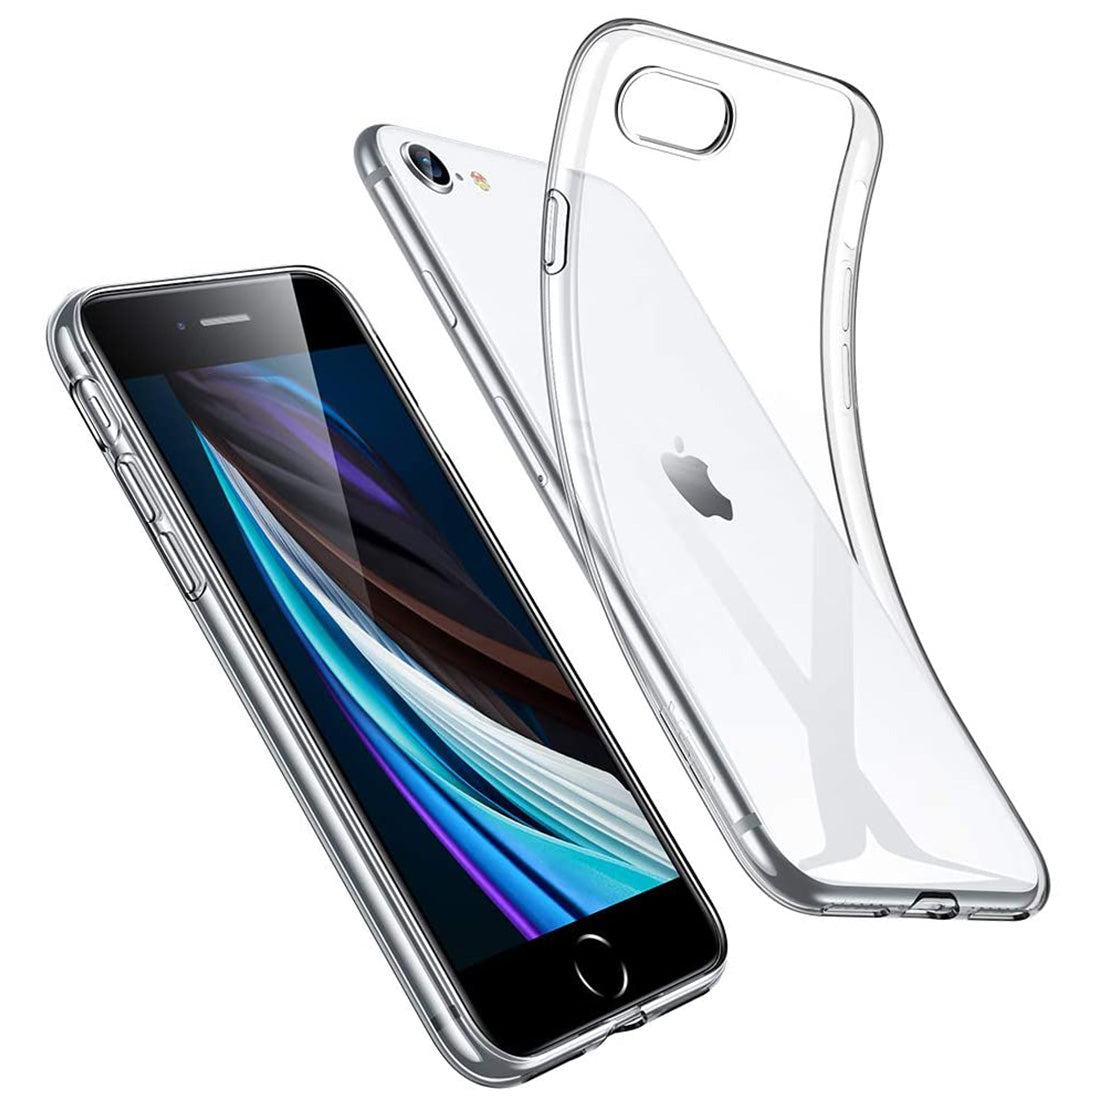 Super Clear Back Case Cover for Apple iPhone 7 / iPhone 8